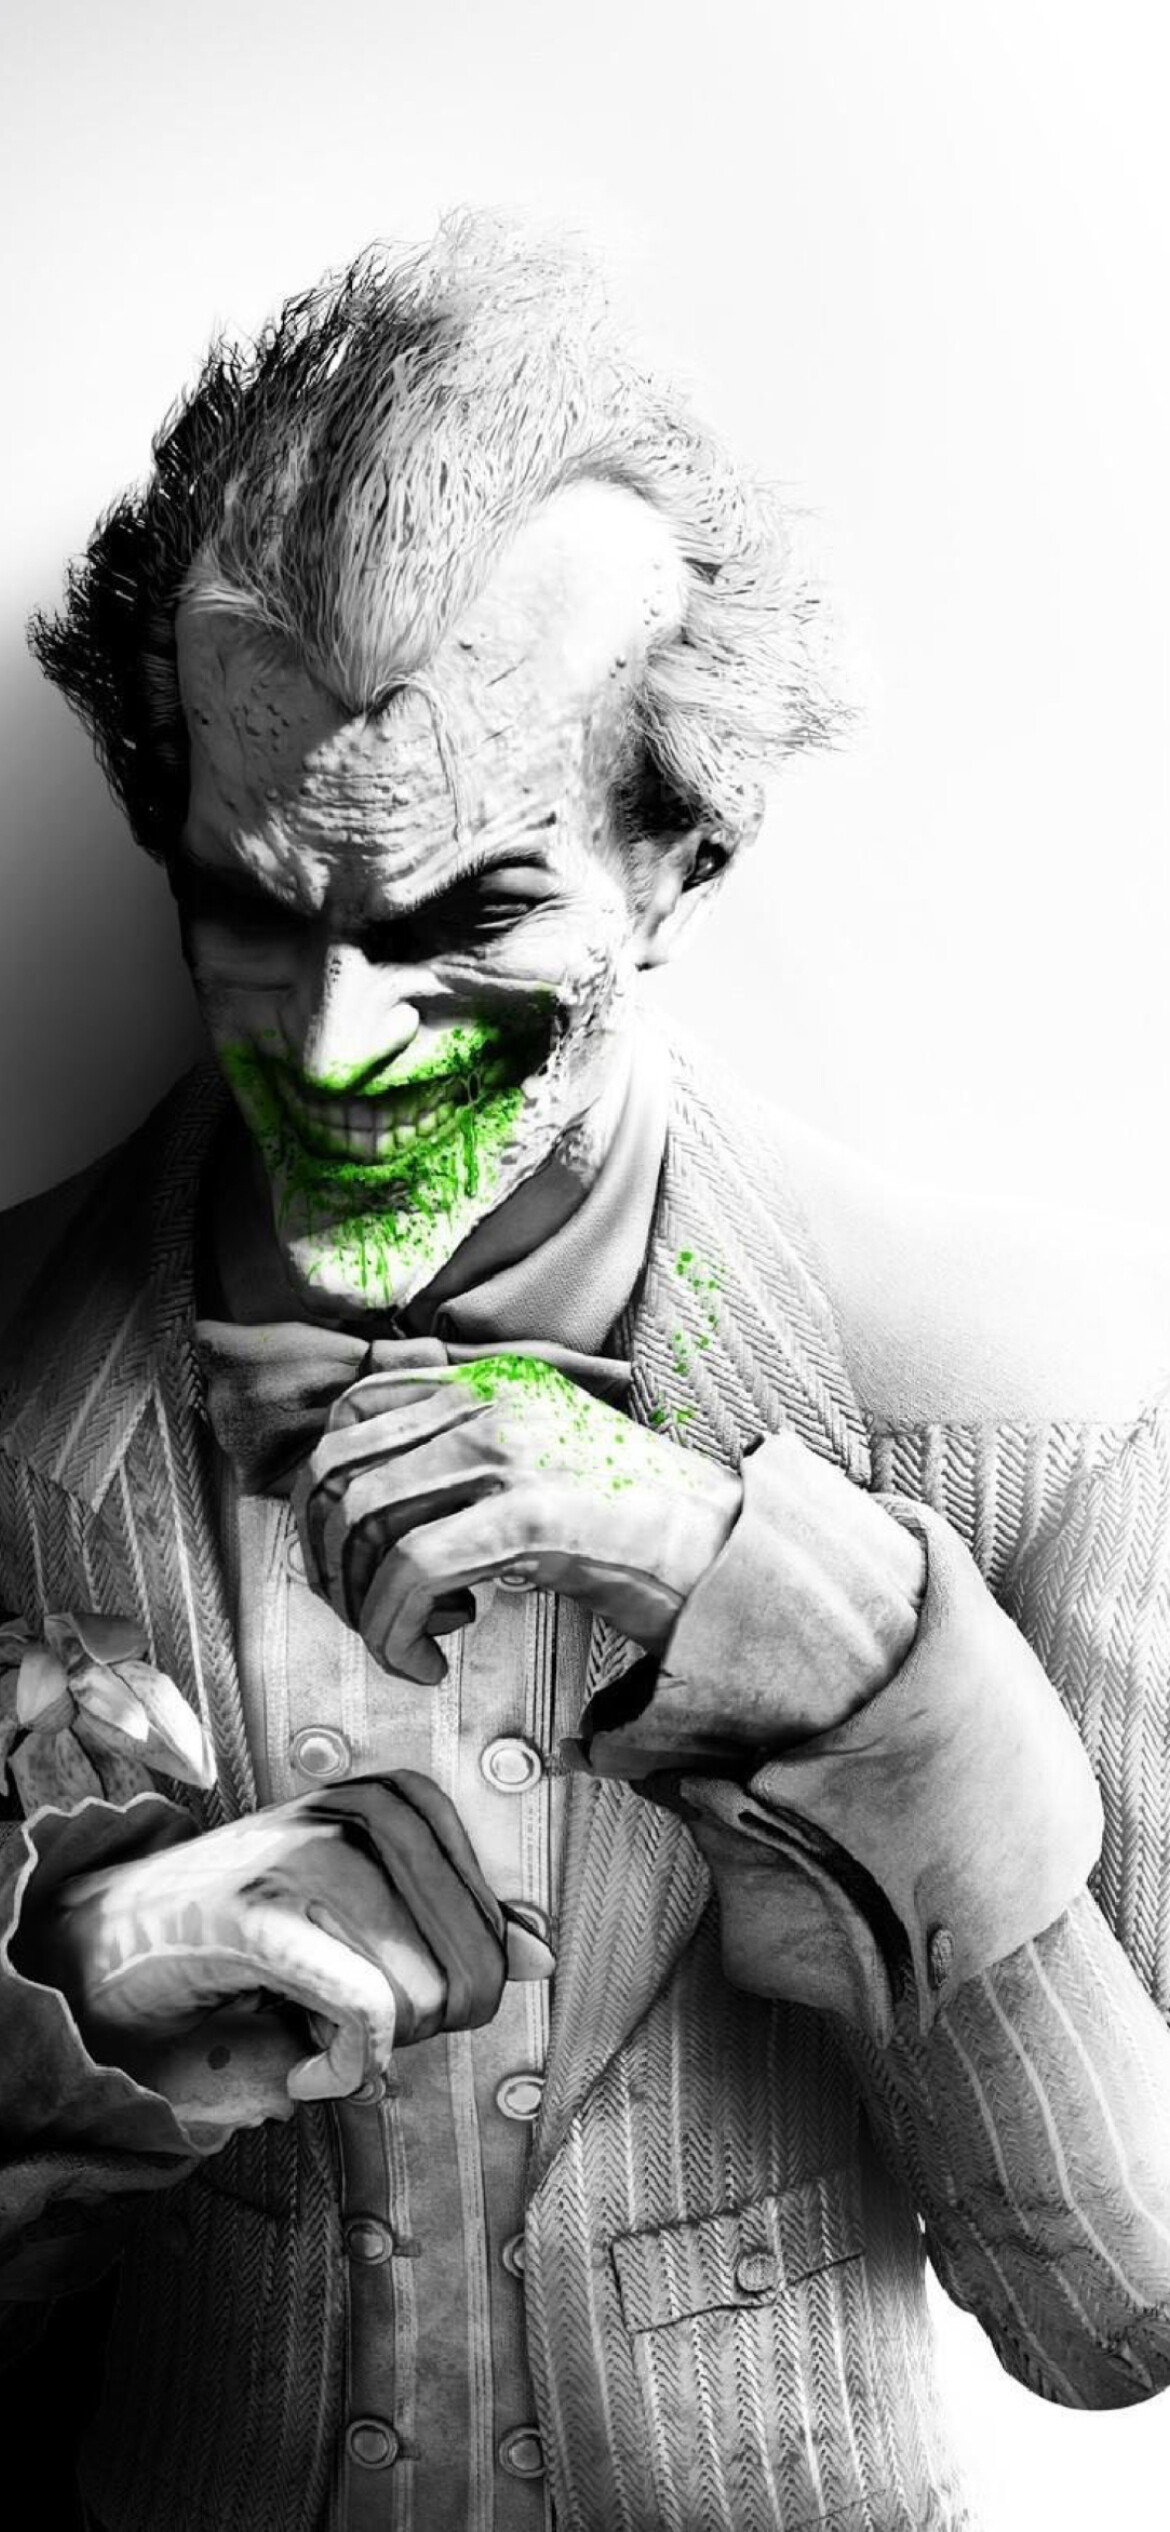 Batman: Arkham City: The Joker, Character of the Year at the 2011 Spike Video Game Awards. 1170x2540 HD Wallpaper.